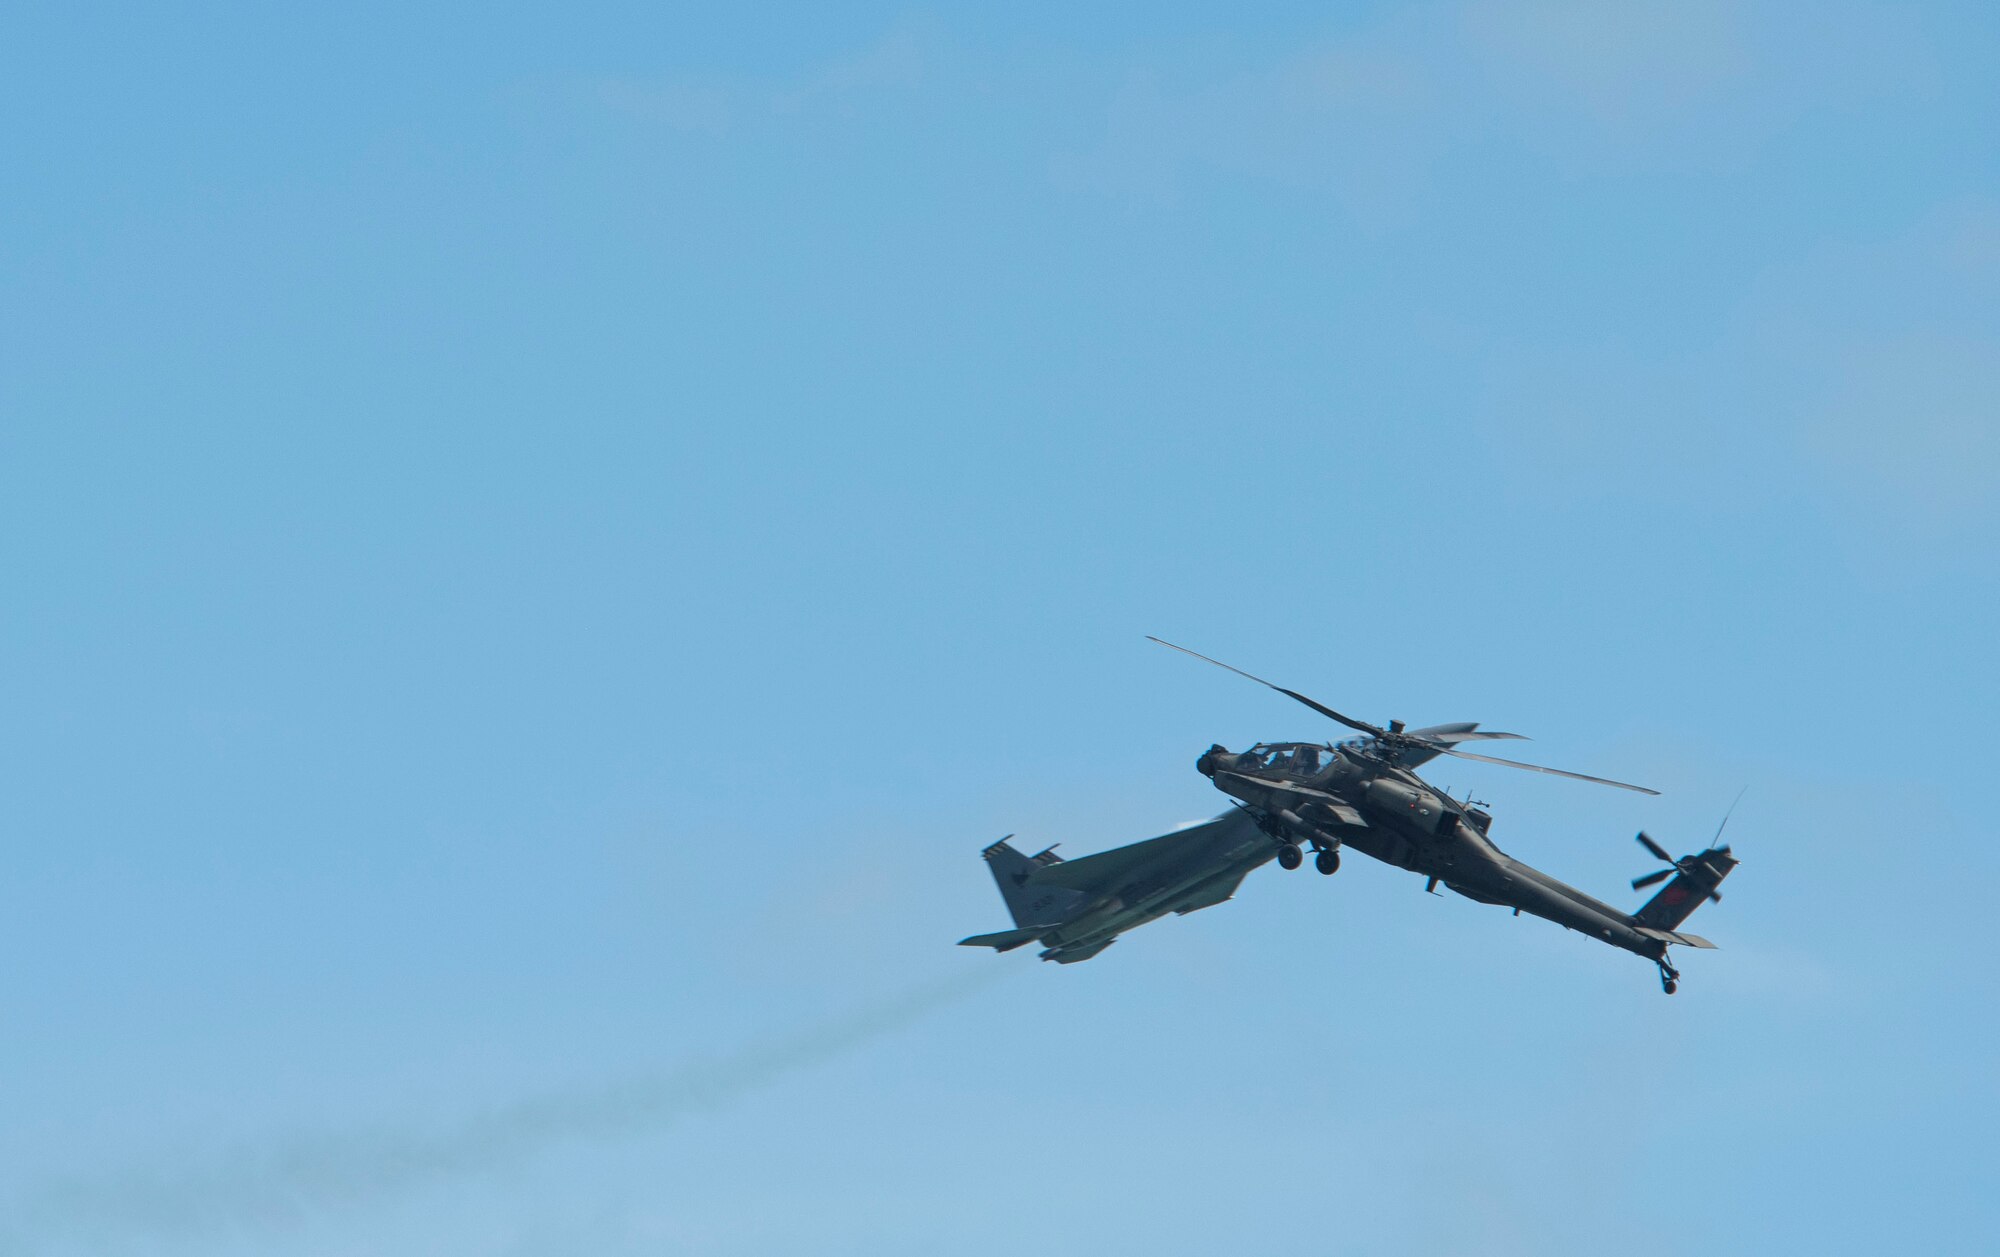 Helo and Fighter Jet cross paths during an aerial demonstration at Singapore Airshow